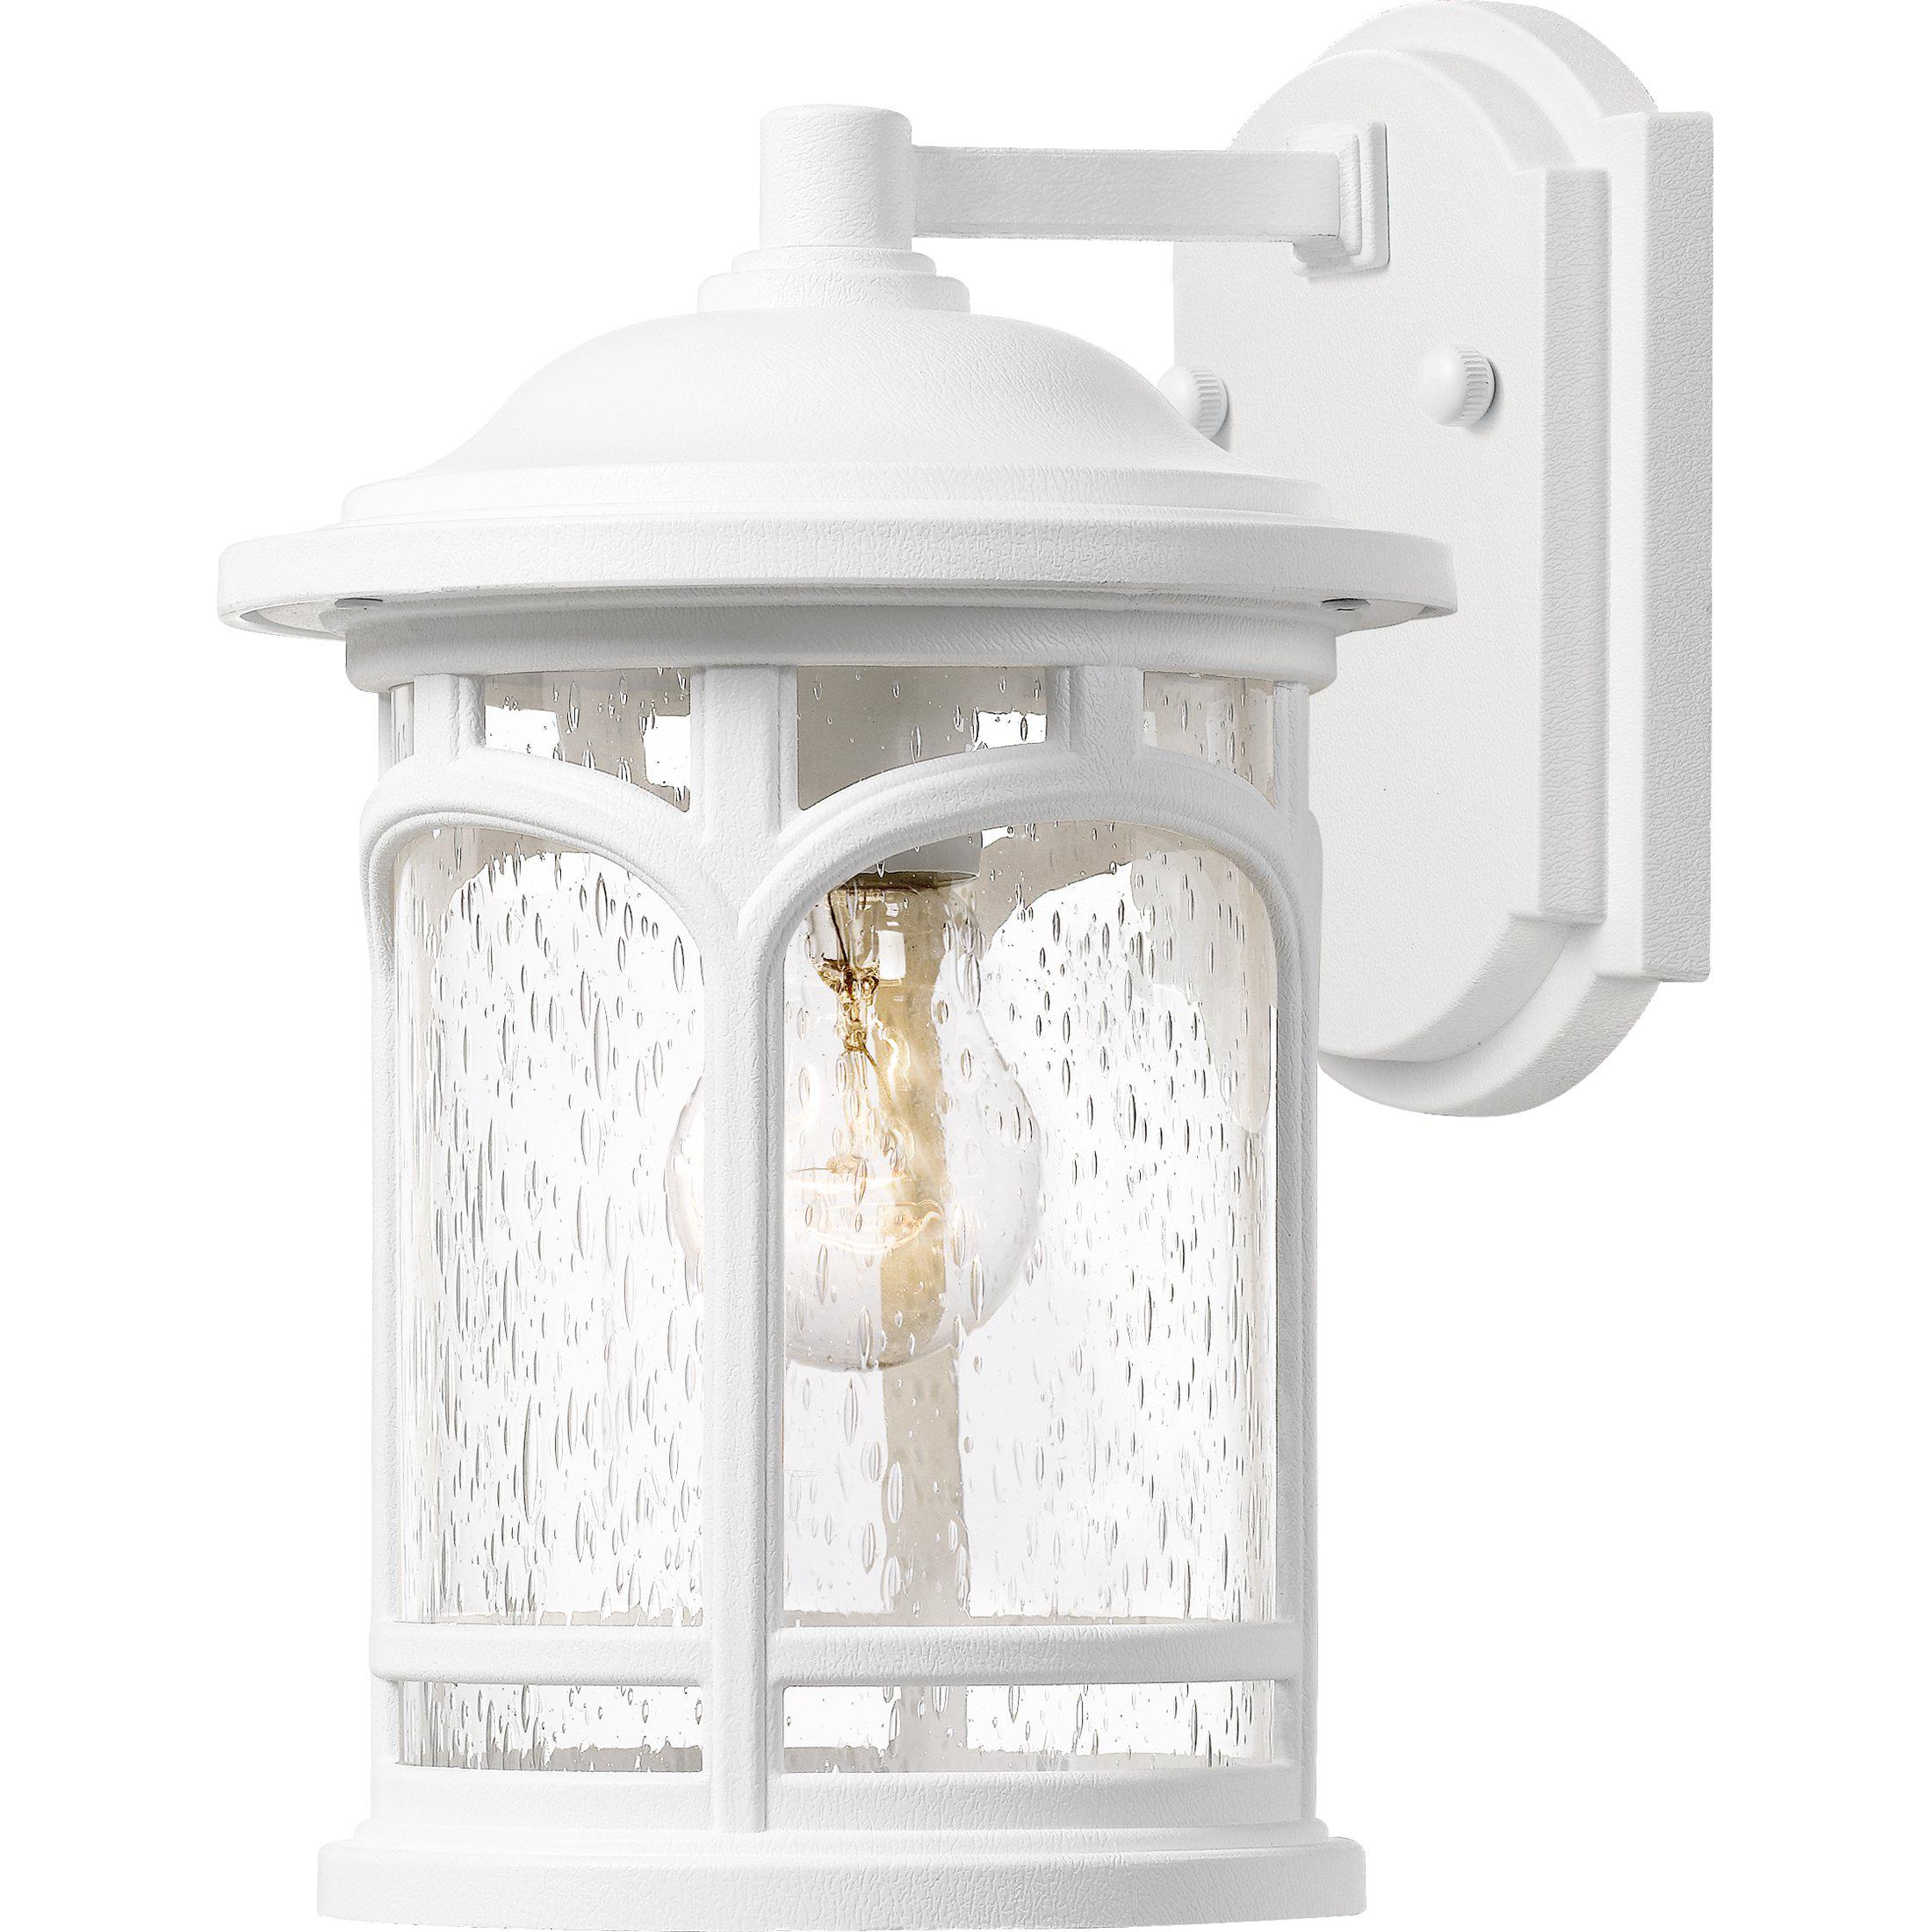 Quoizel  Marblehead Outdoor Lantern, Small Outdoor Light Fixture Quoizel White Lustre  